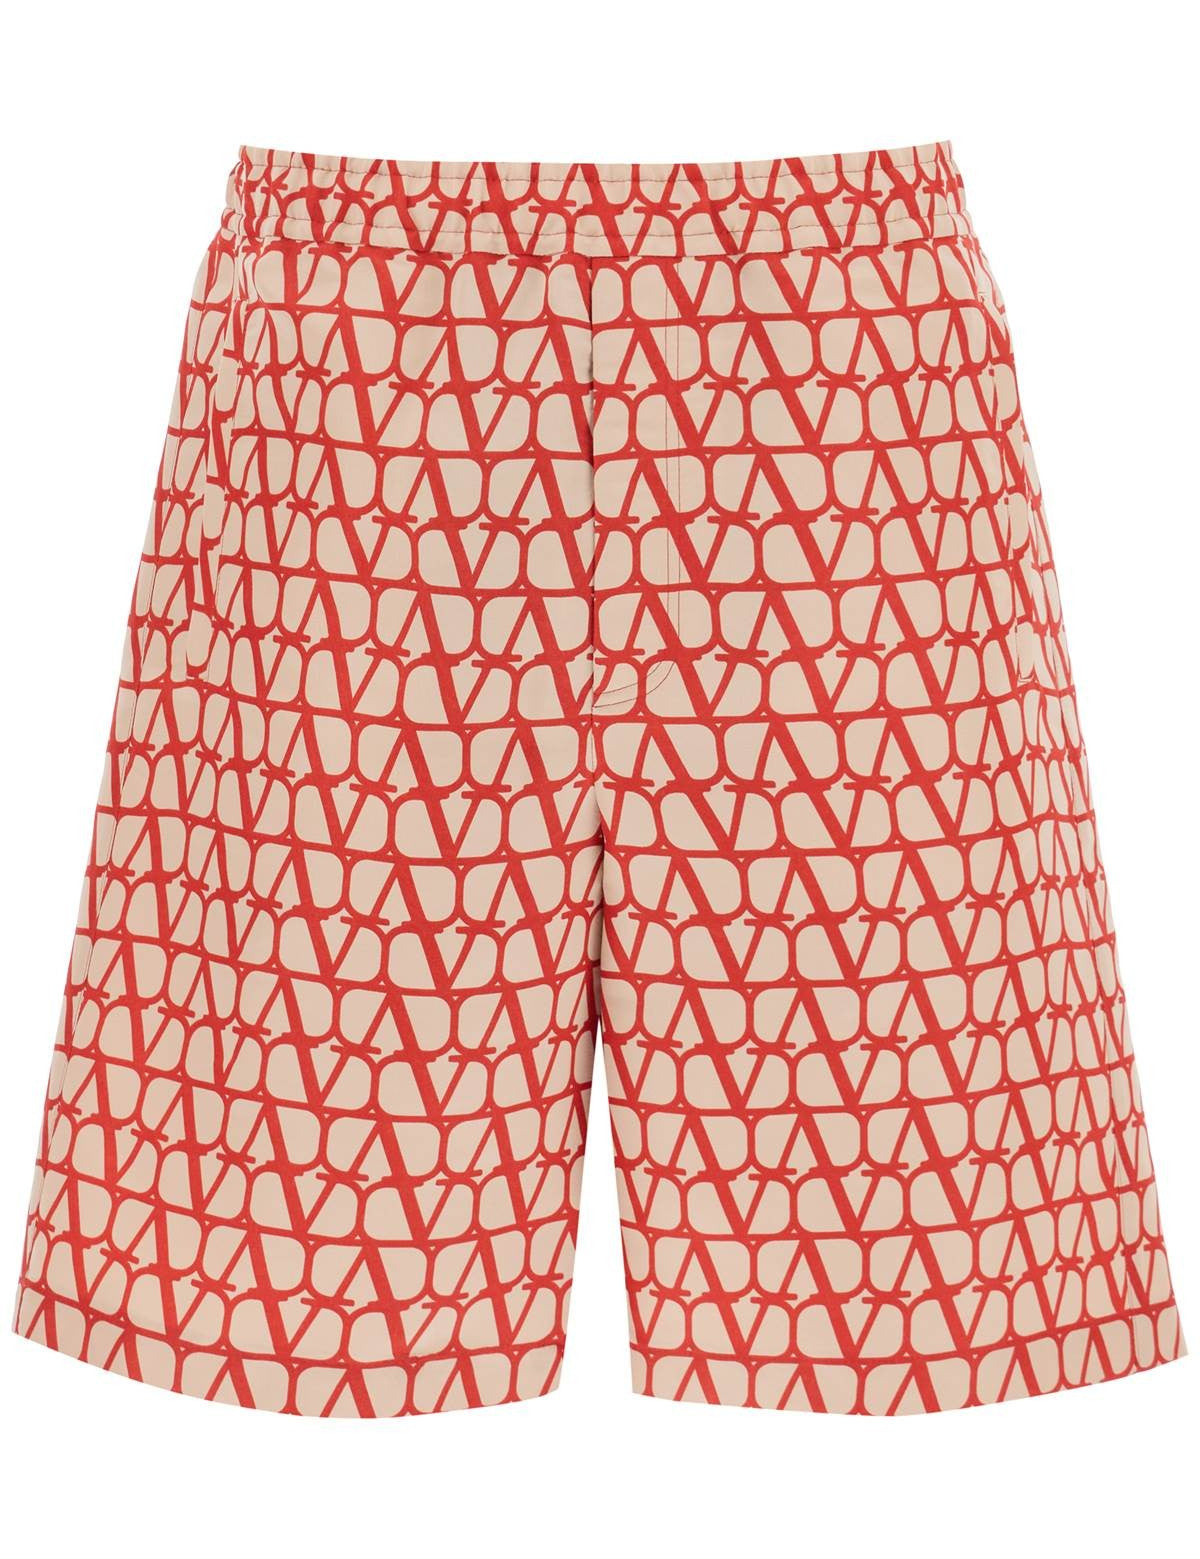 valentino-shorts-in-silk-faille-with-toile-iconographe-motif.jpg